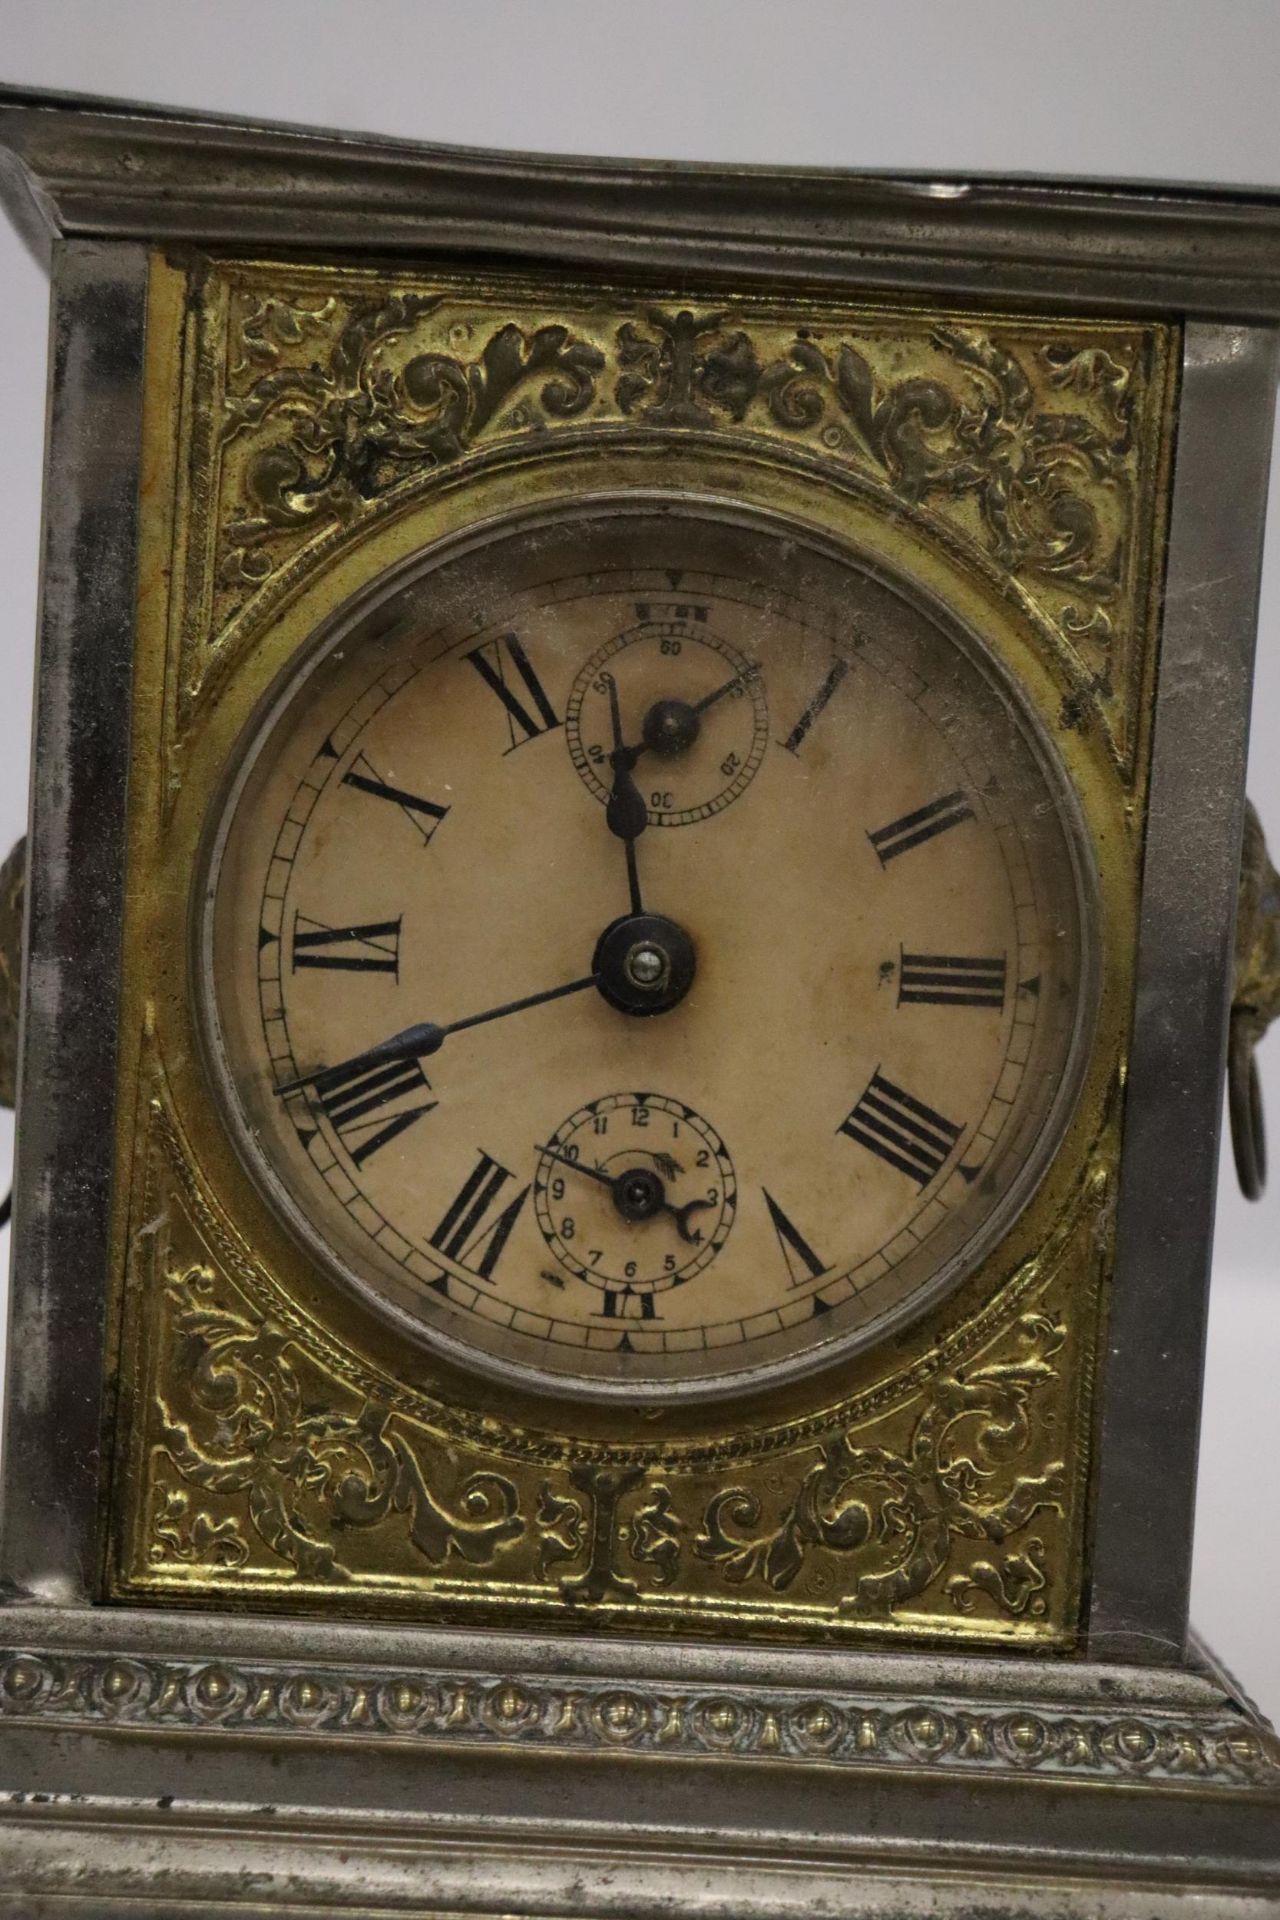 AN ORNATE VINTAGE ALARM CARRIAGE CLOCK WITH LION HANDLE DECORATION TO THE SIDES - POSSIBLY AN - Image 6 of 9